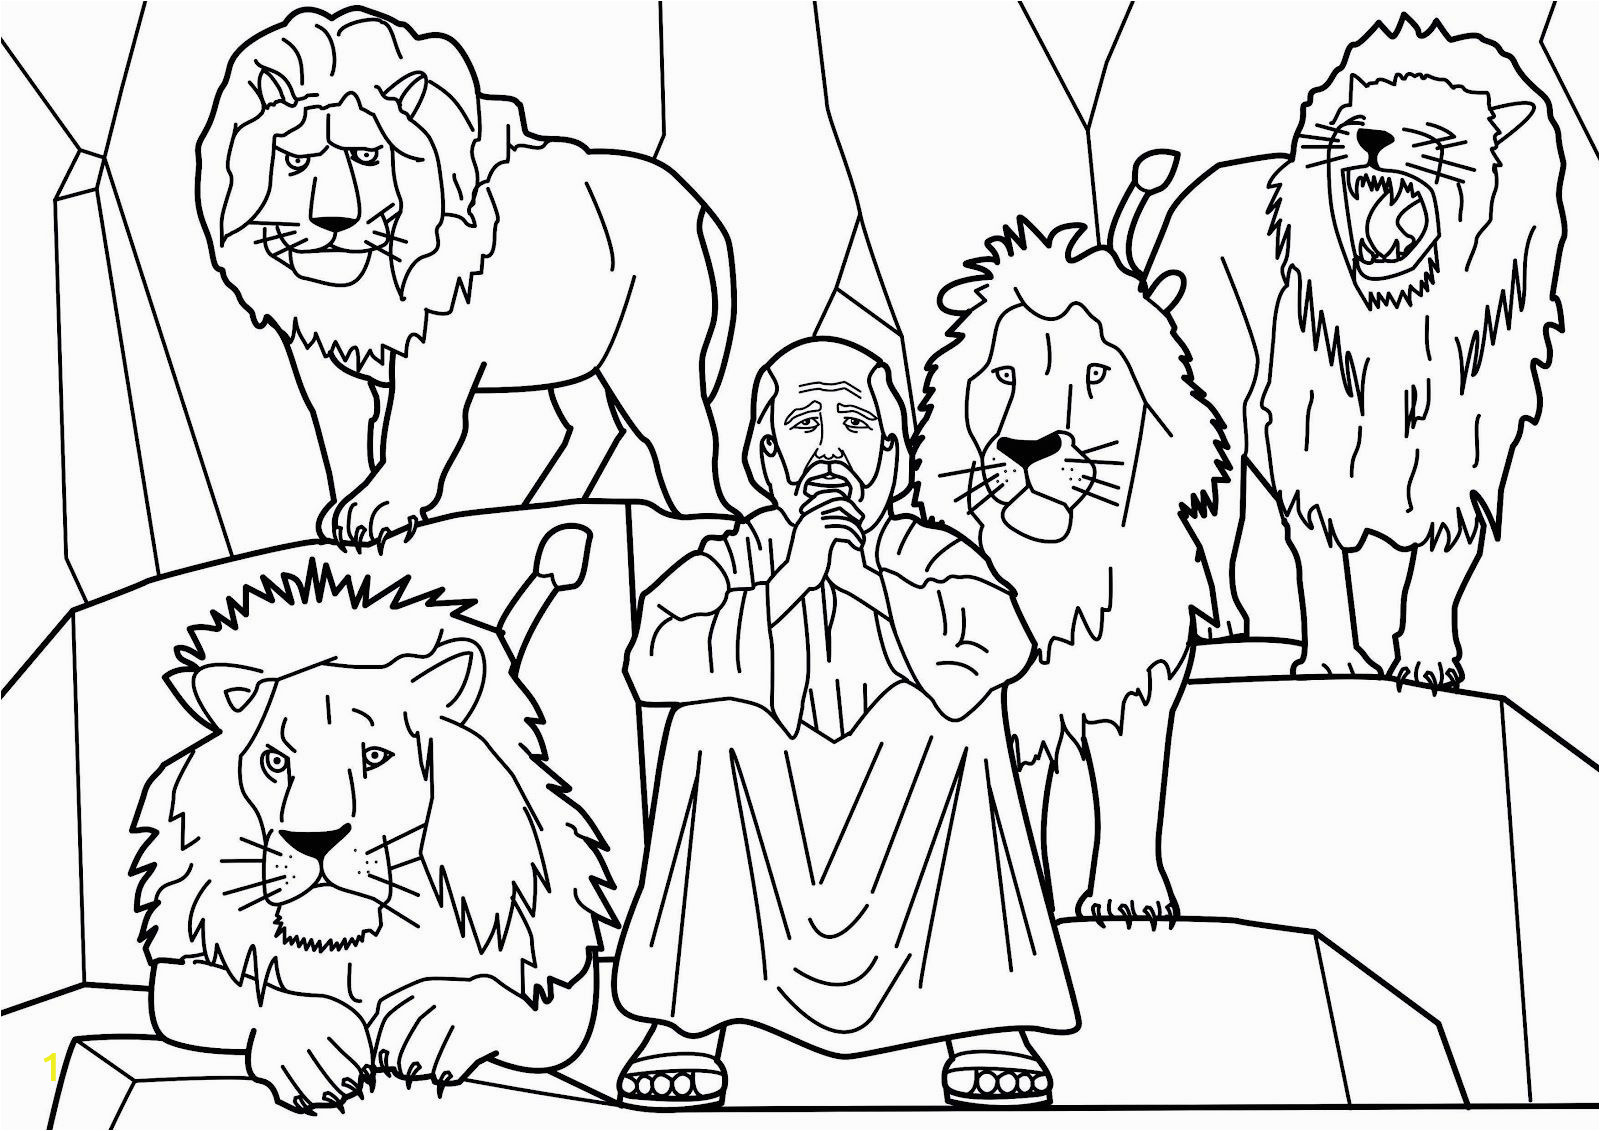 Daniel and the Lions Den Coloring Page Printable Dare Daniel and the Lions Story From Holy Bible and Images